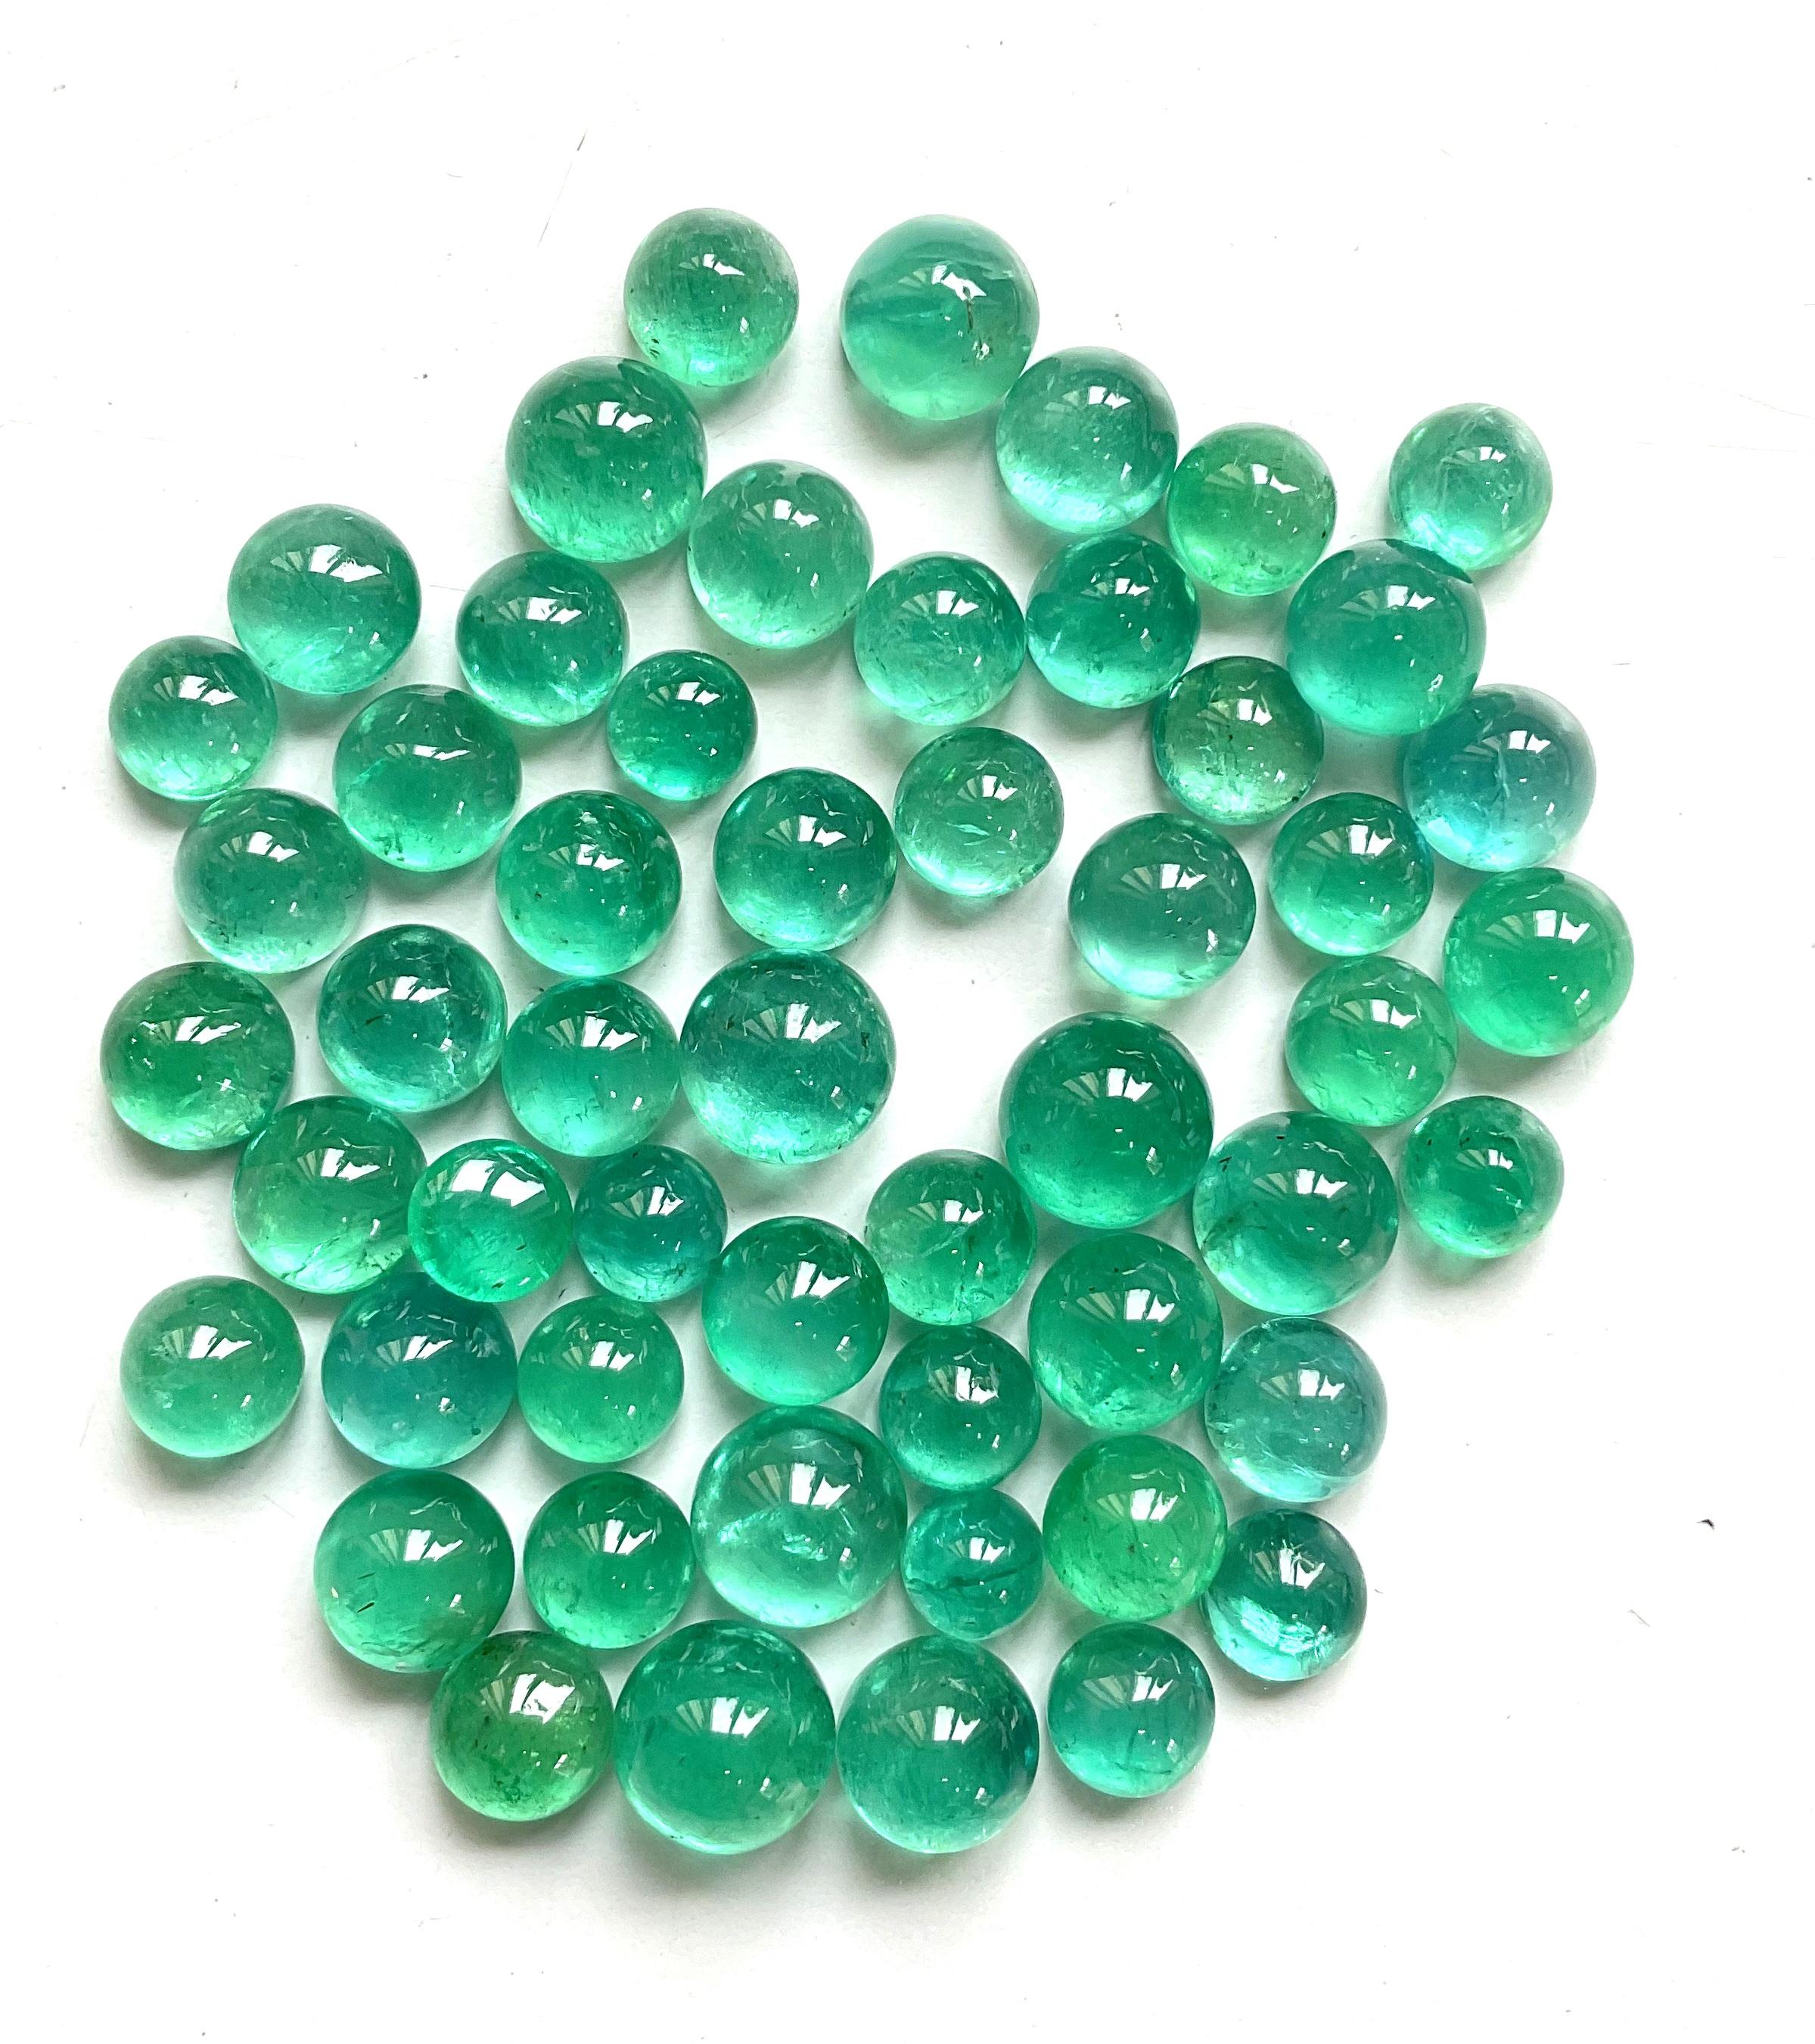 111.00 carats Zambian Emerald Round Plain Cabs Top Quality For Jewelry Gemstone  en vente 1